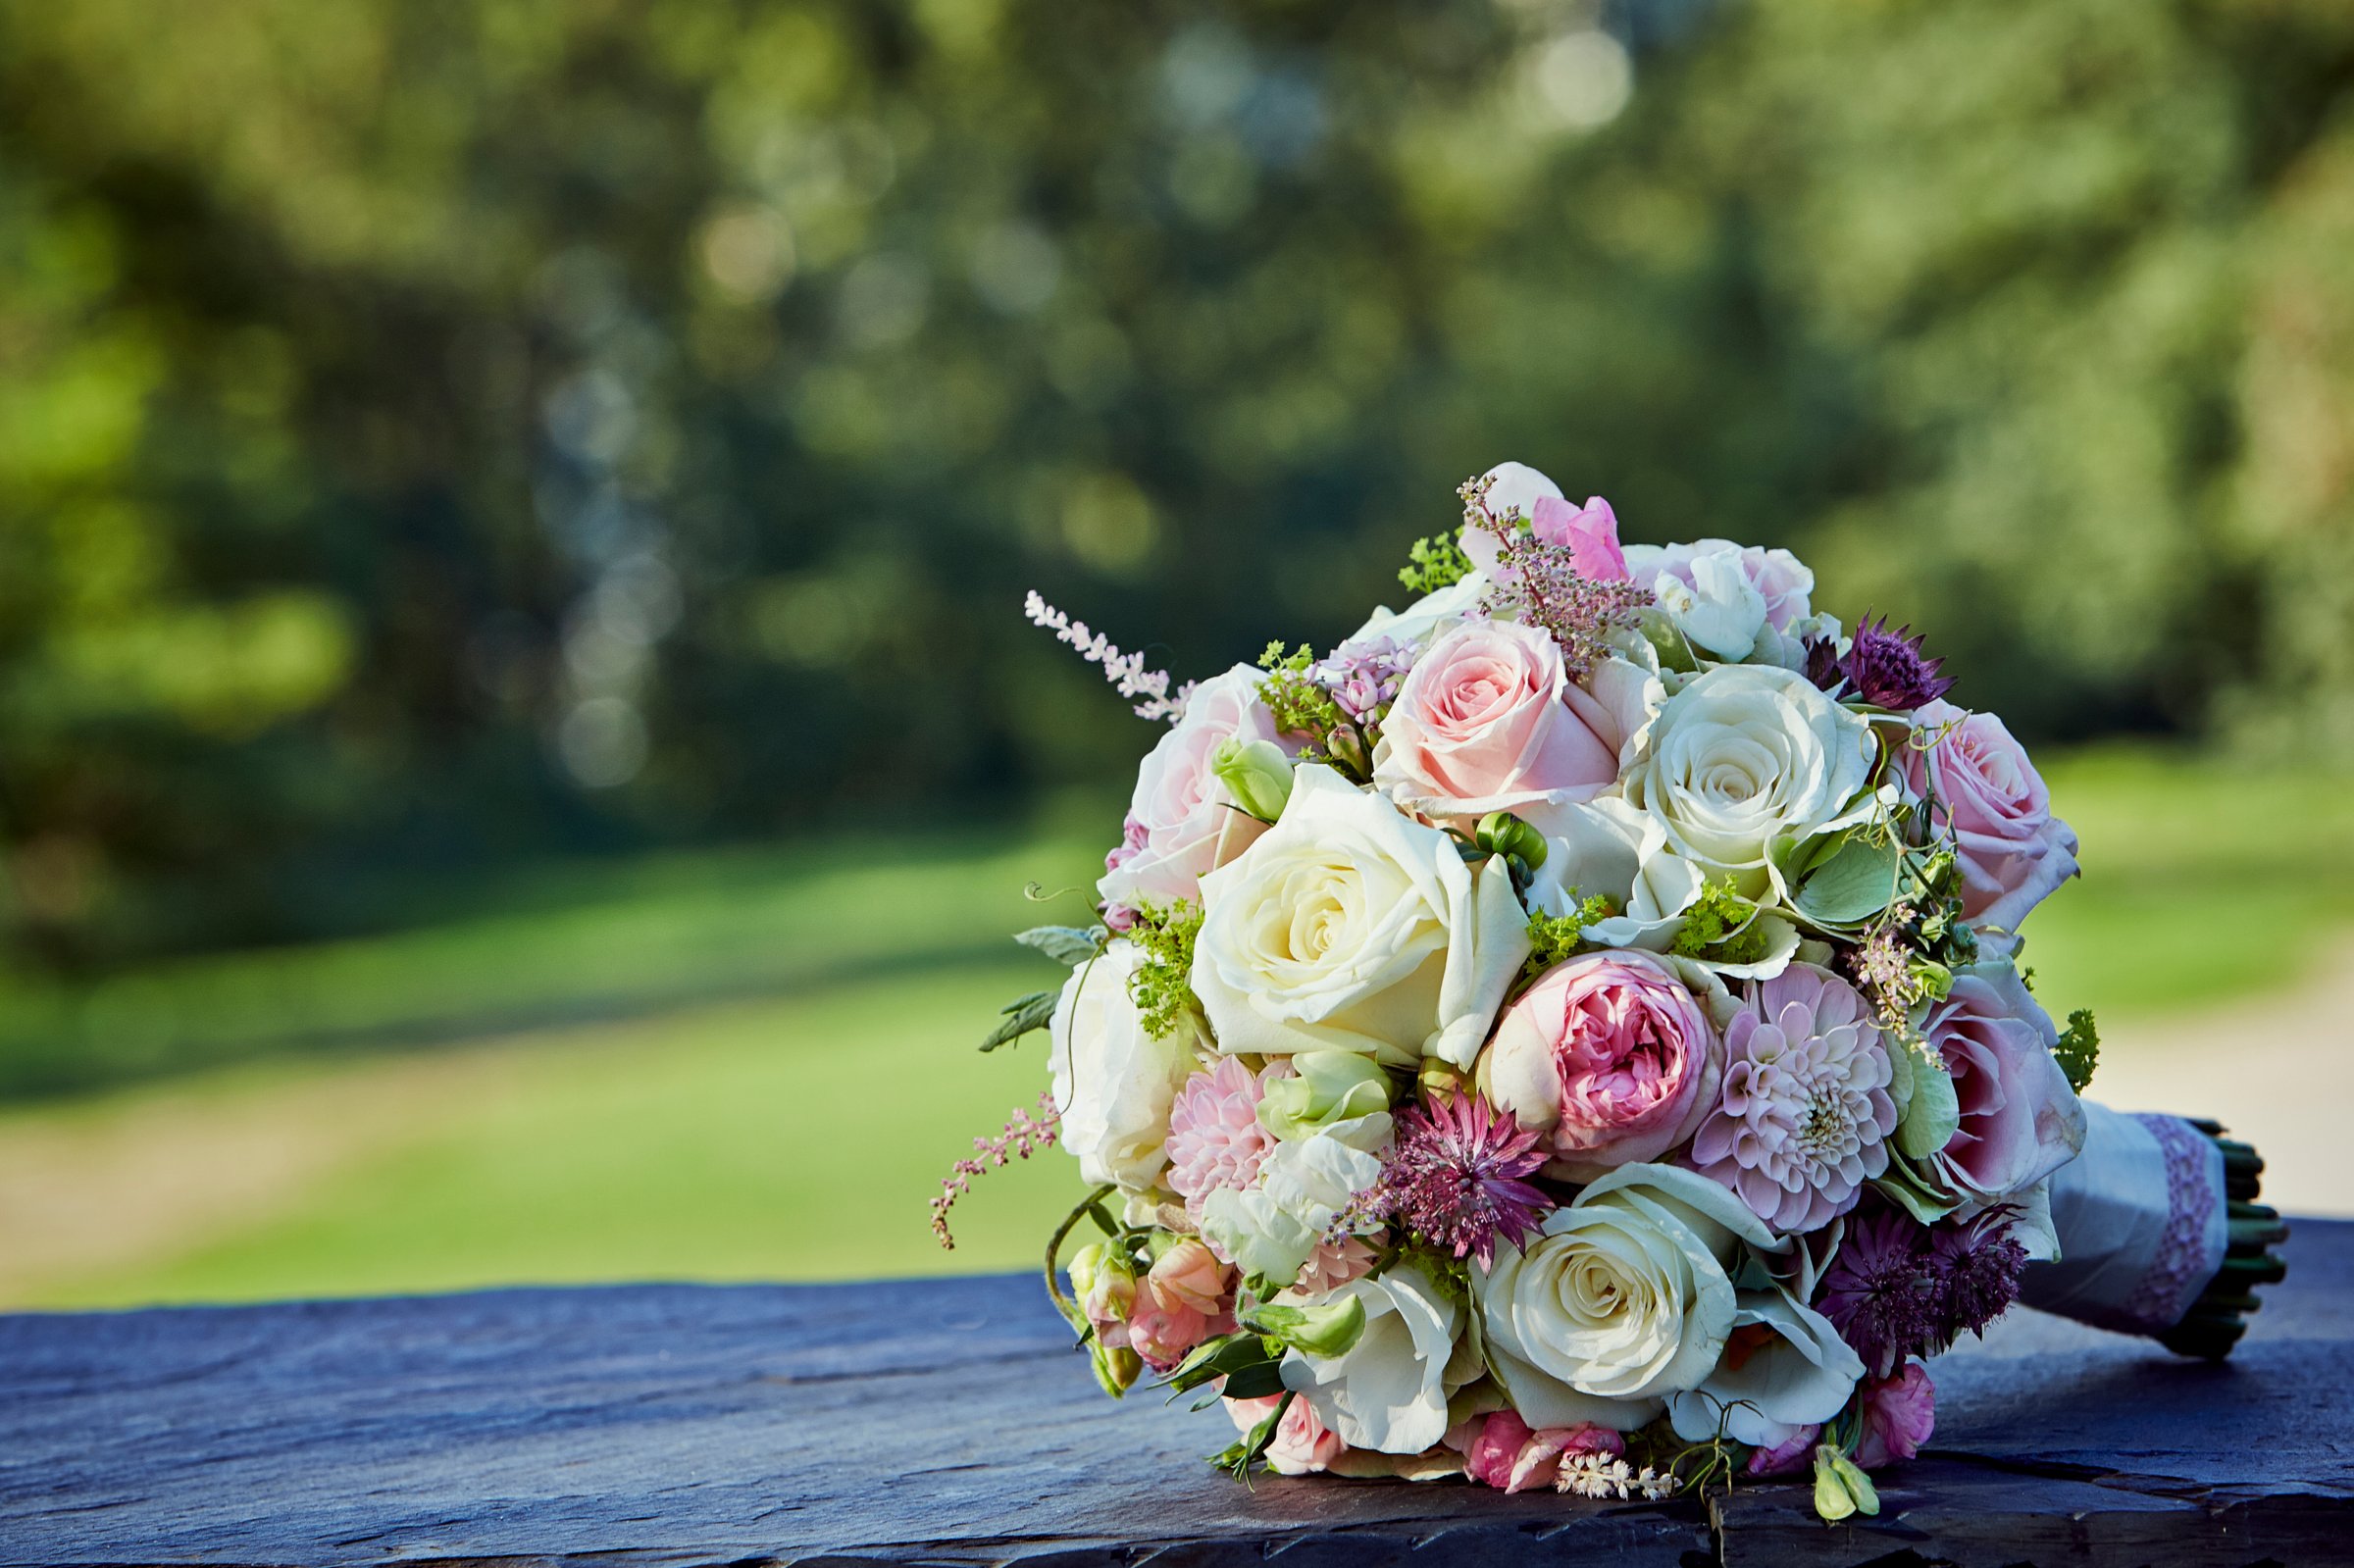 Bouquet photographed before a wedding ceremony